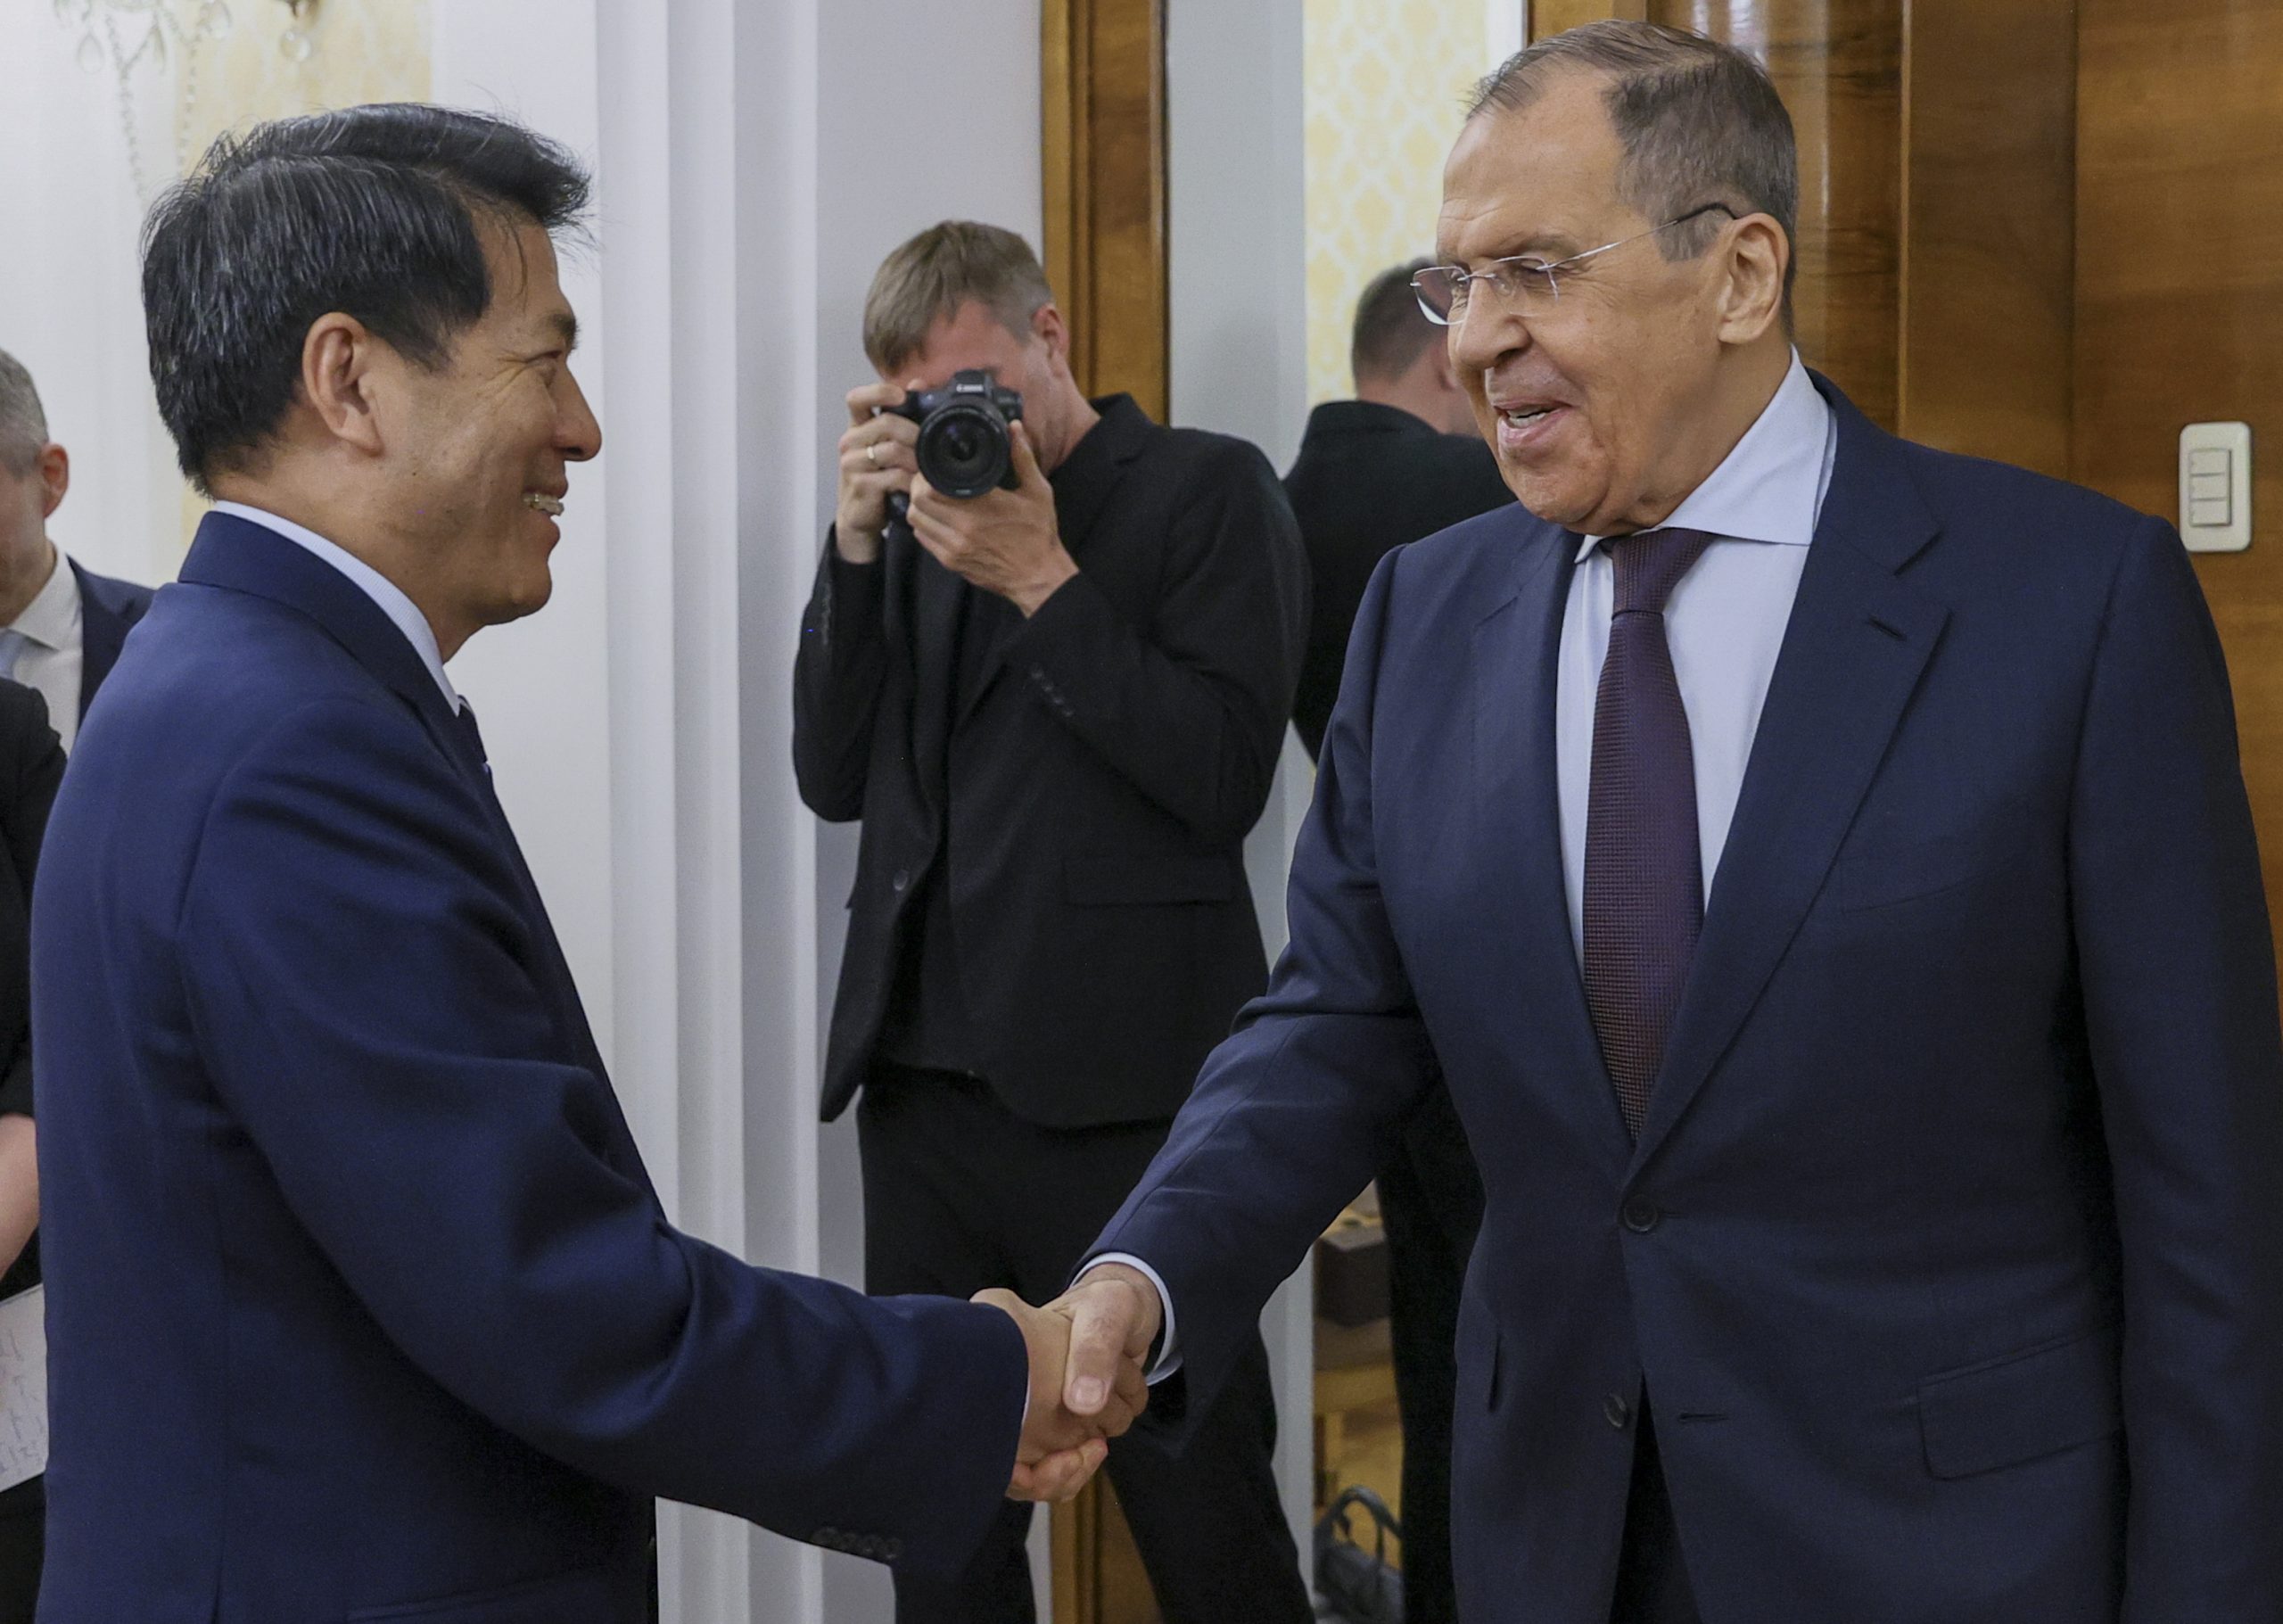 epa10655476 A handout photo made available by Russian Foreign Ministry Press Service shows Special Representative of the Chinese Government on Eurasian Affairs Li Hui (L) shakes hands with Russian Foreign Minister Sergei Lavrov during their meeting in Moscow, Russia, 26 May 2023. Li Hui plans to hold talks on a peaceful settlement of the crisis in Ukraine. The Chinese envoy visited Belgium, Poland, France, Ukraine, Germany during his tour, where he discussed China's peace plan for a political settlement of the conflict in Ukraine.  EPA/RUSSIAN FOREIGN MINISTRY PRESS SERVICE / HANDOUT  HANDOUT EDITORIAL USE ONLY/NO SALES